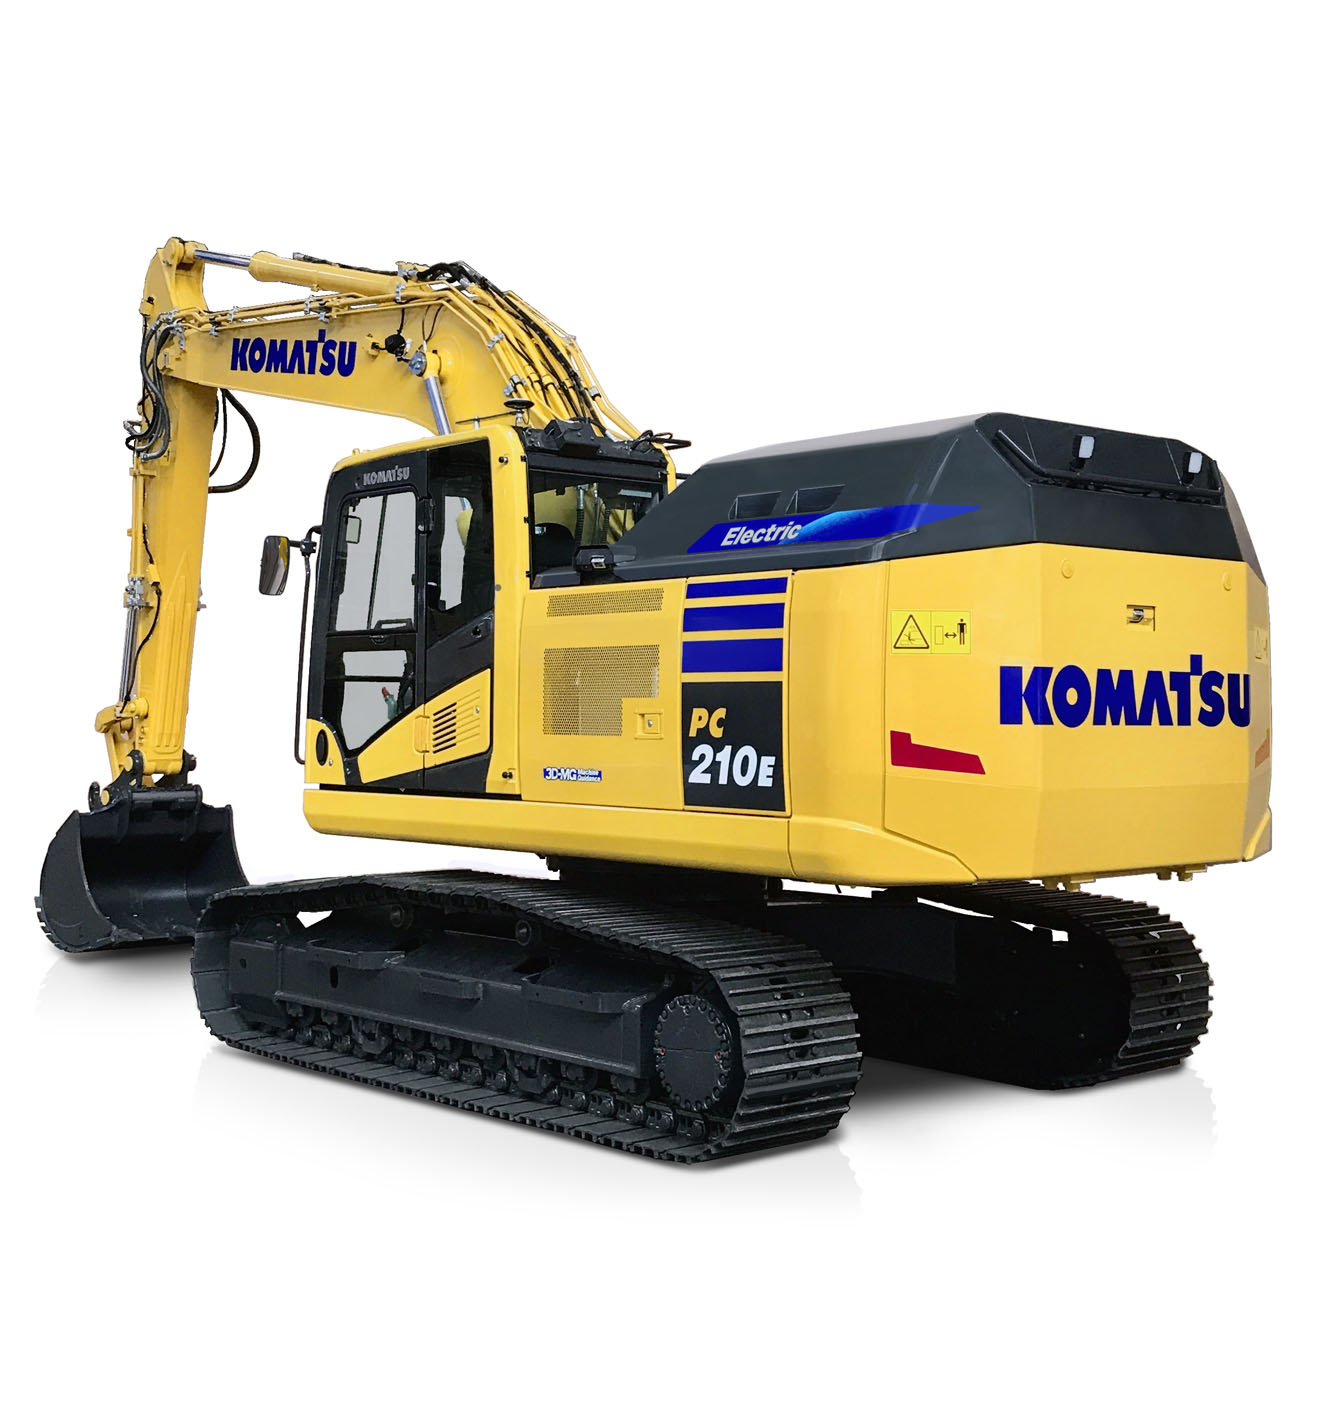 Komatsu to exhibit 20-ton class Proterra powered electric hydraulic for the first time